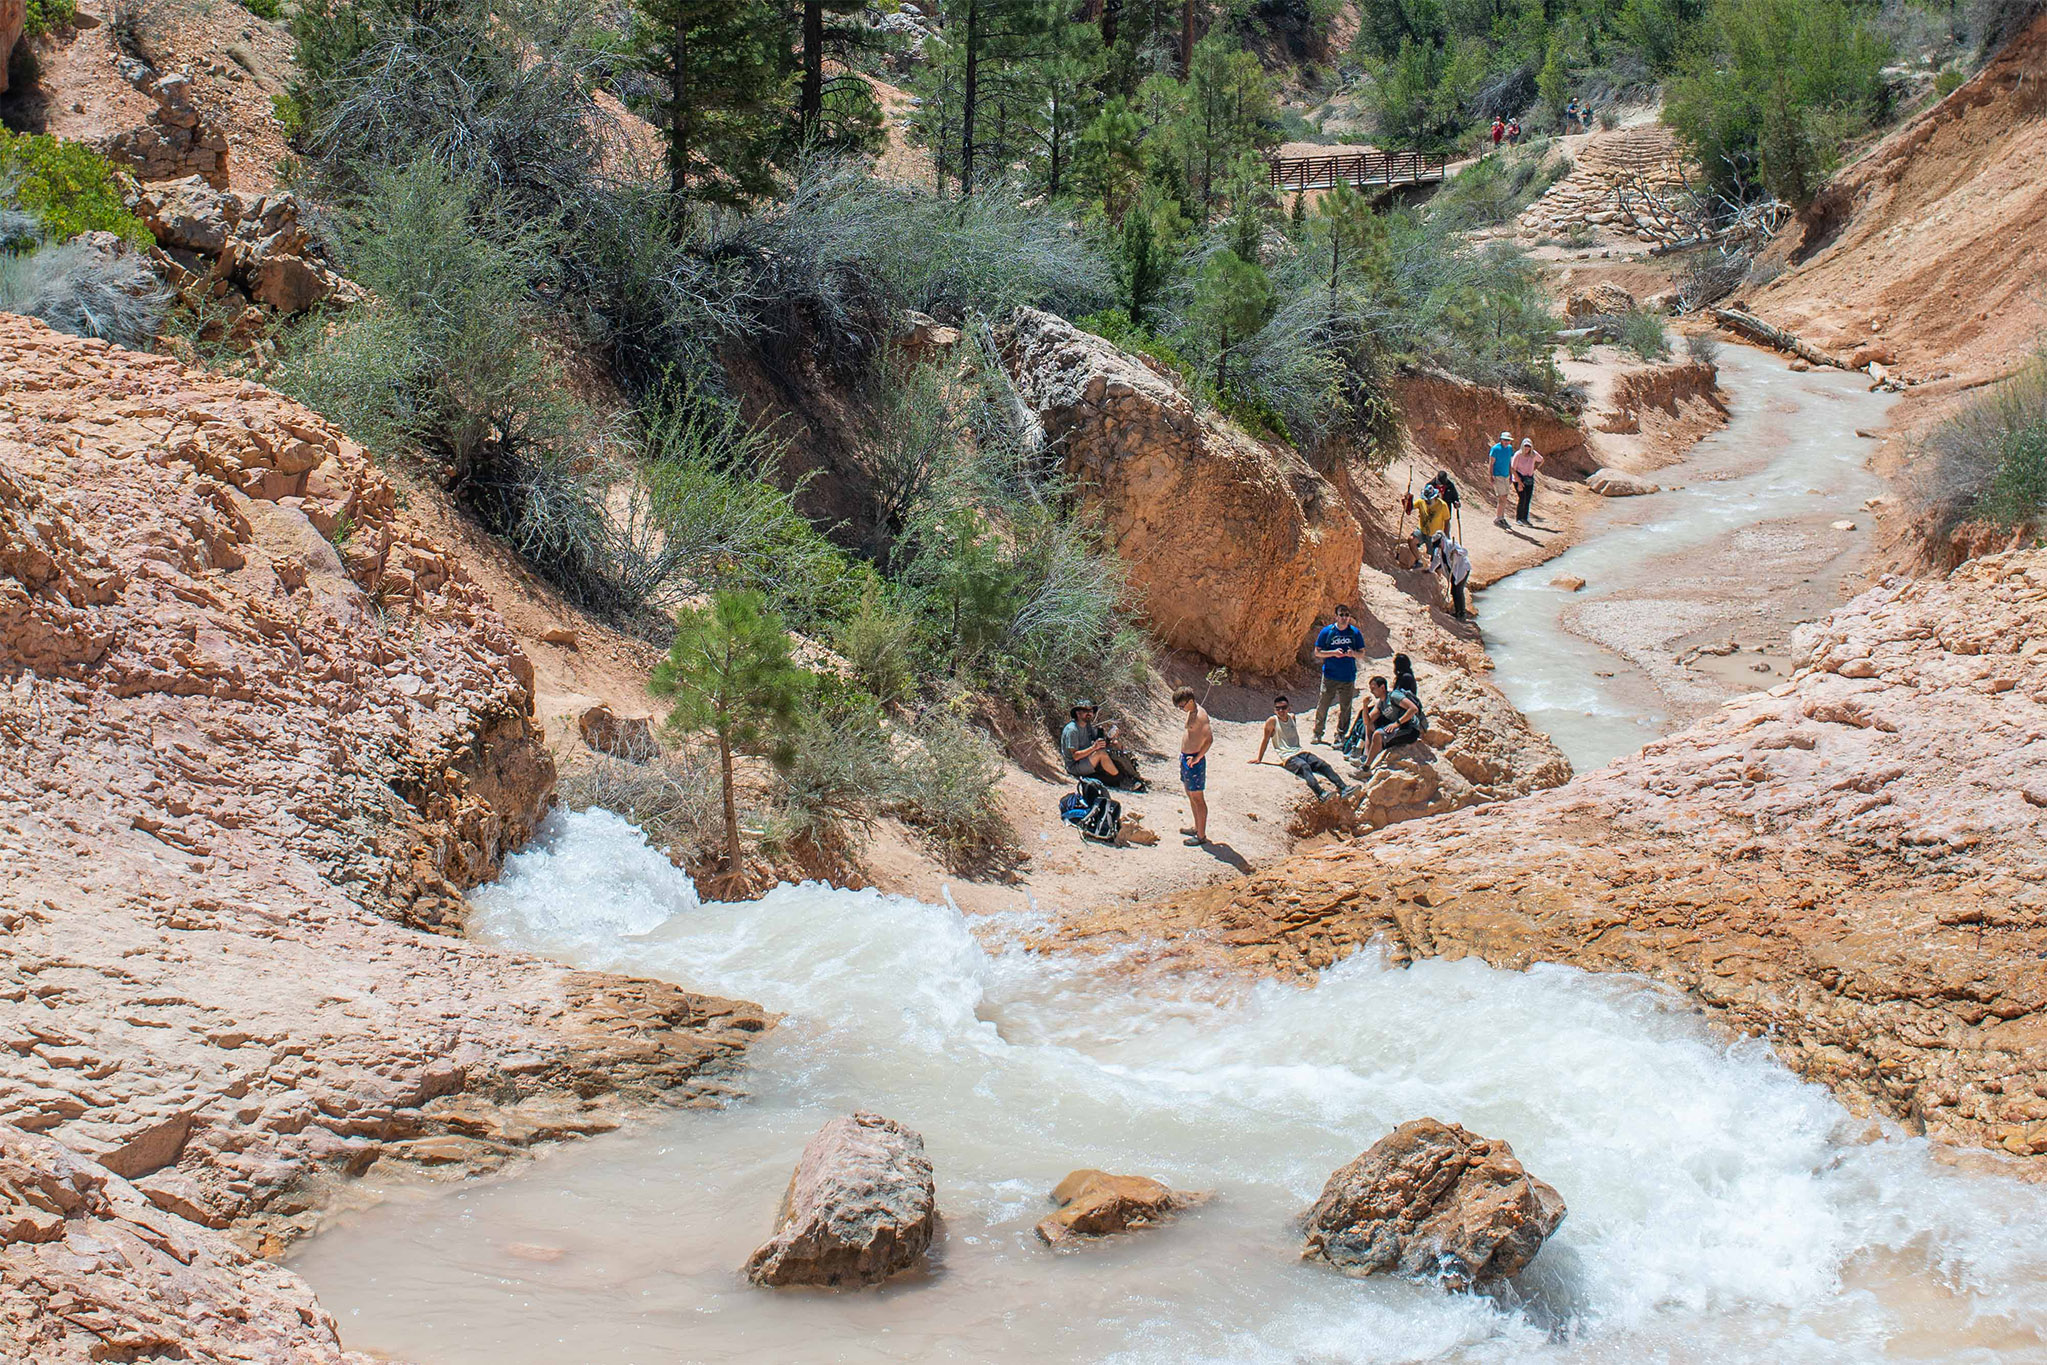 People gather along the edge of a small stream in a forested red rock canyon